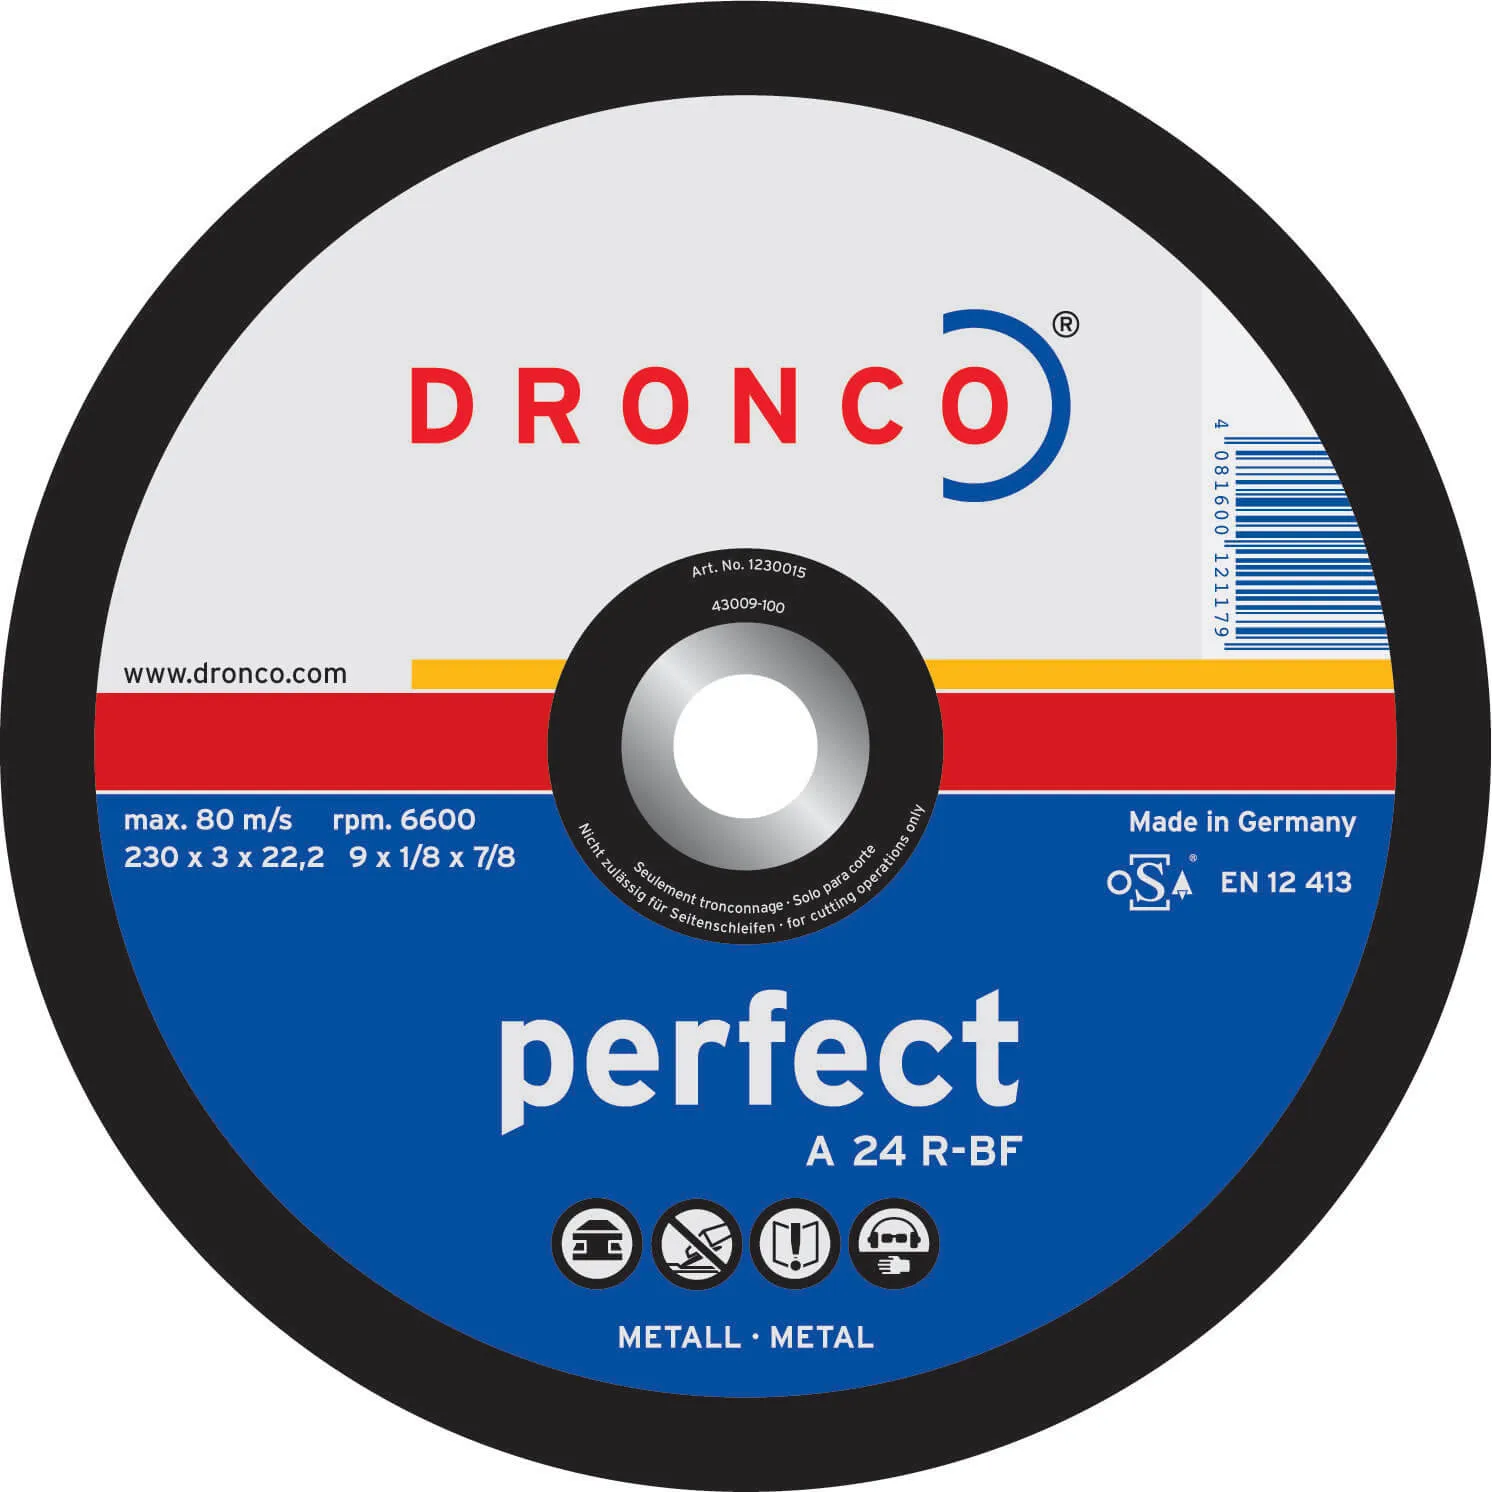 Dronco A 24 R PERFECT Flat Metal Cutting Disc - 180mm, Pack of 1